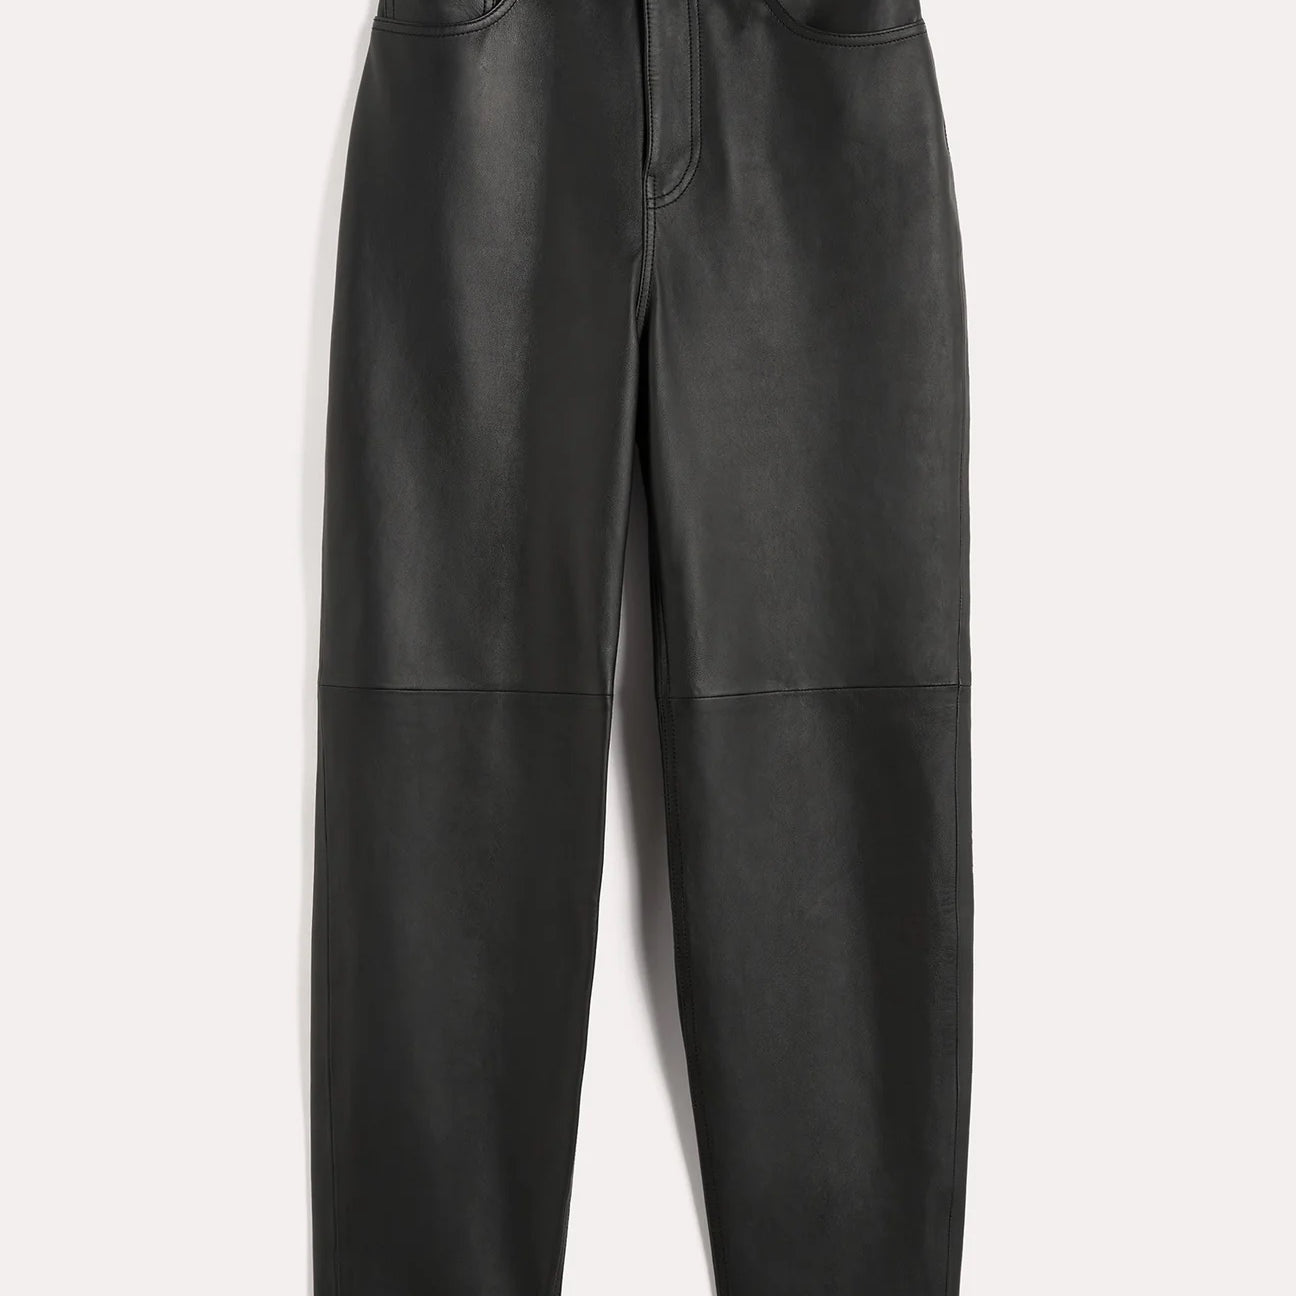 Wide leg leather pants in black by Magda Butrym – The Line